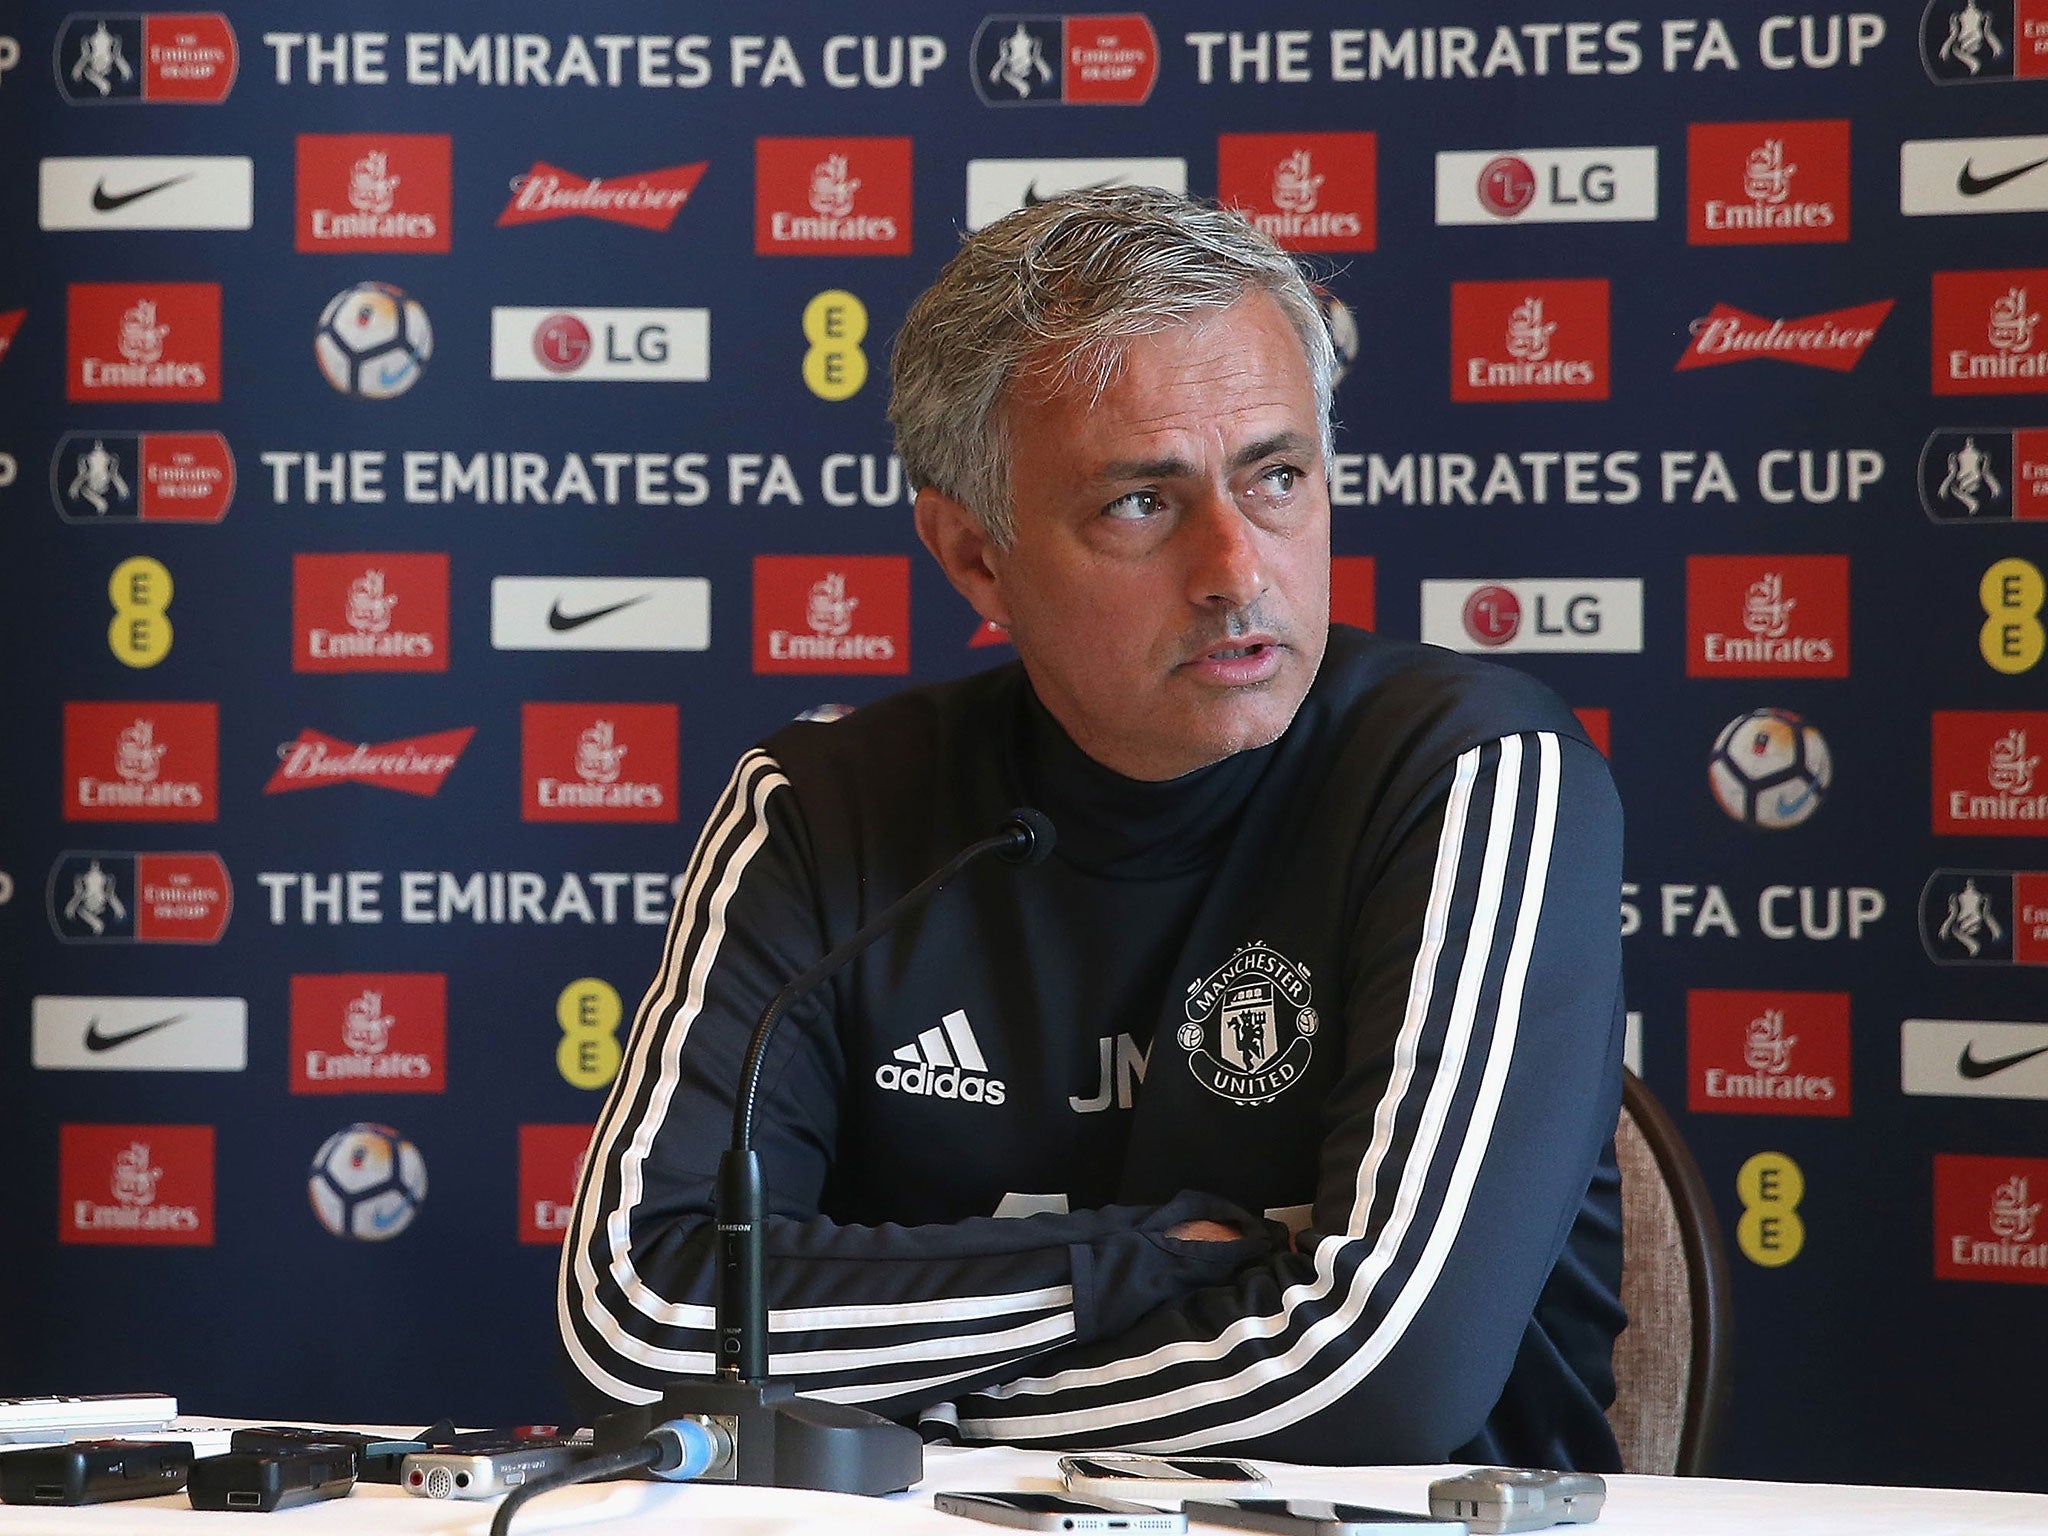 FA Cup final: Manchester United will wait until &apos;last moment&apos; to decide if Romelu Lukaku is fit to play, says Jose Mourinho